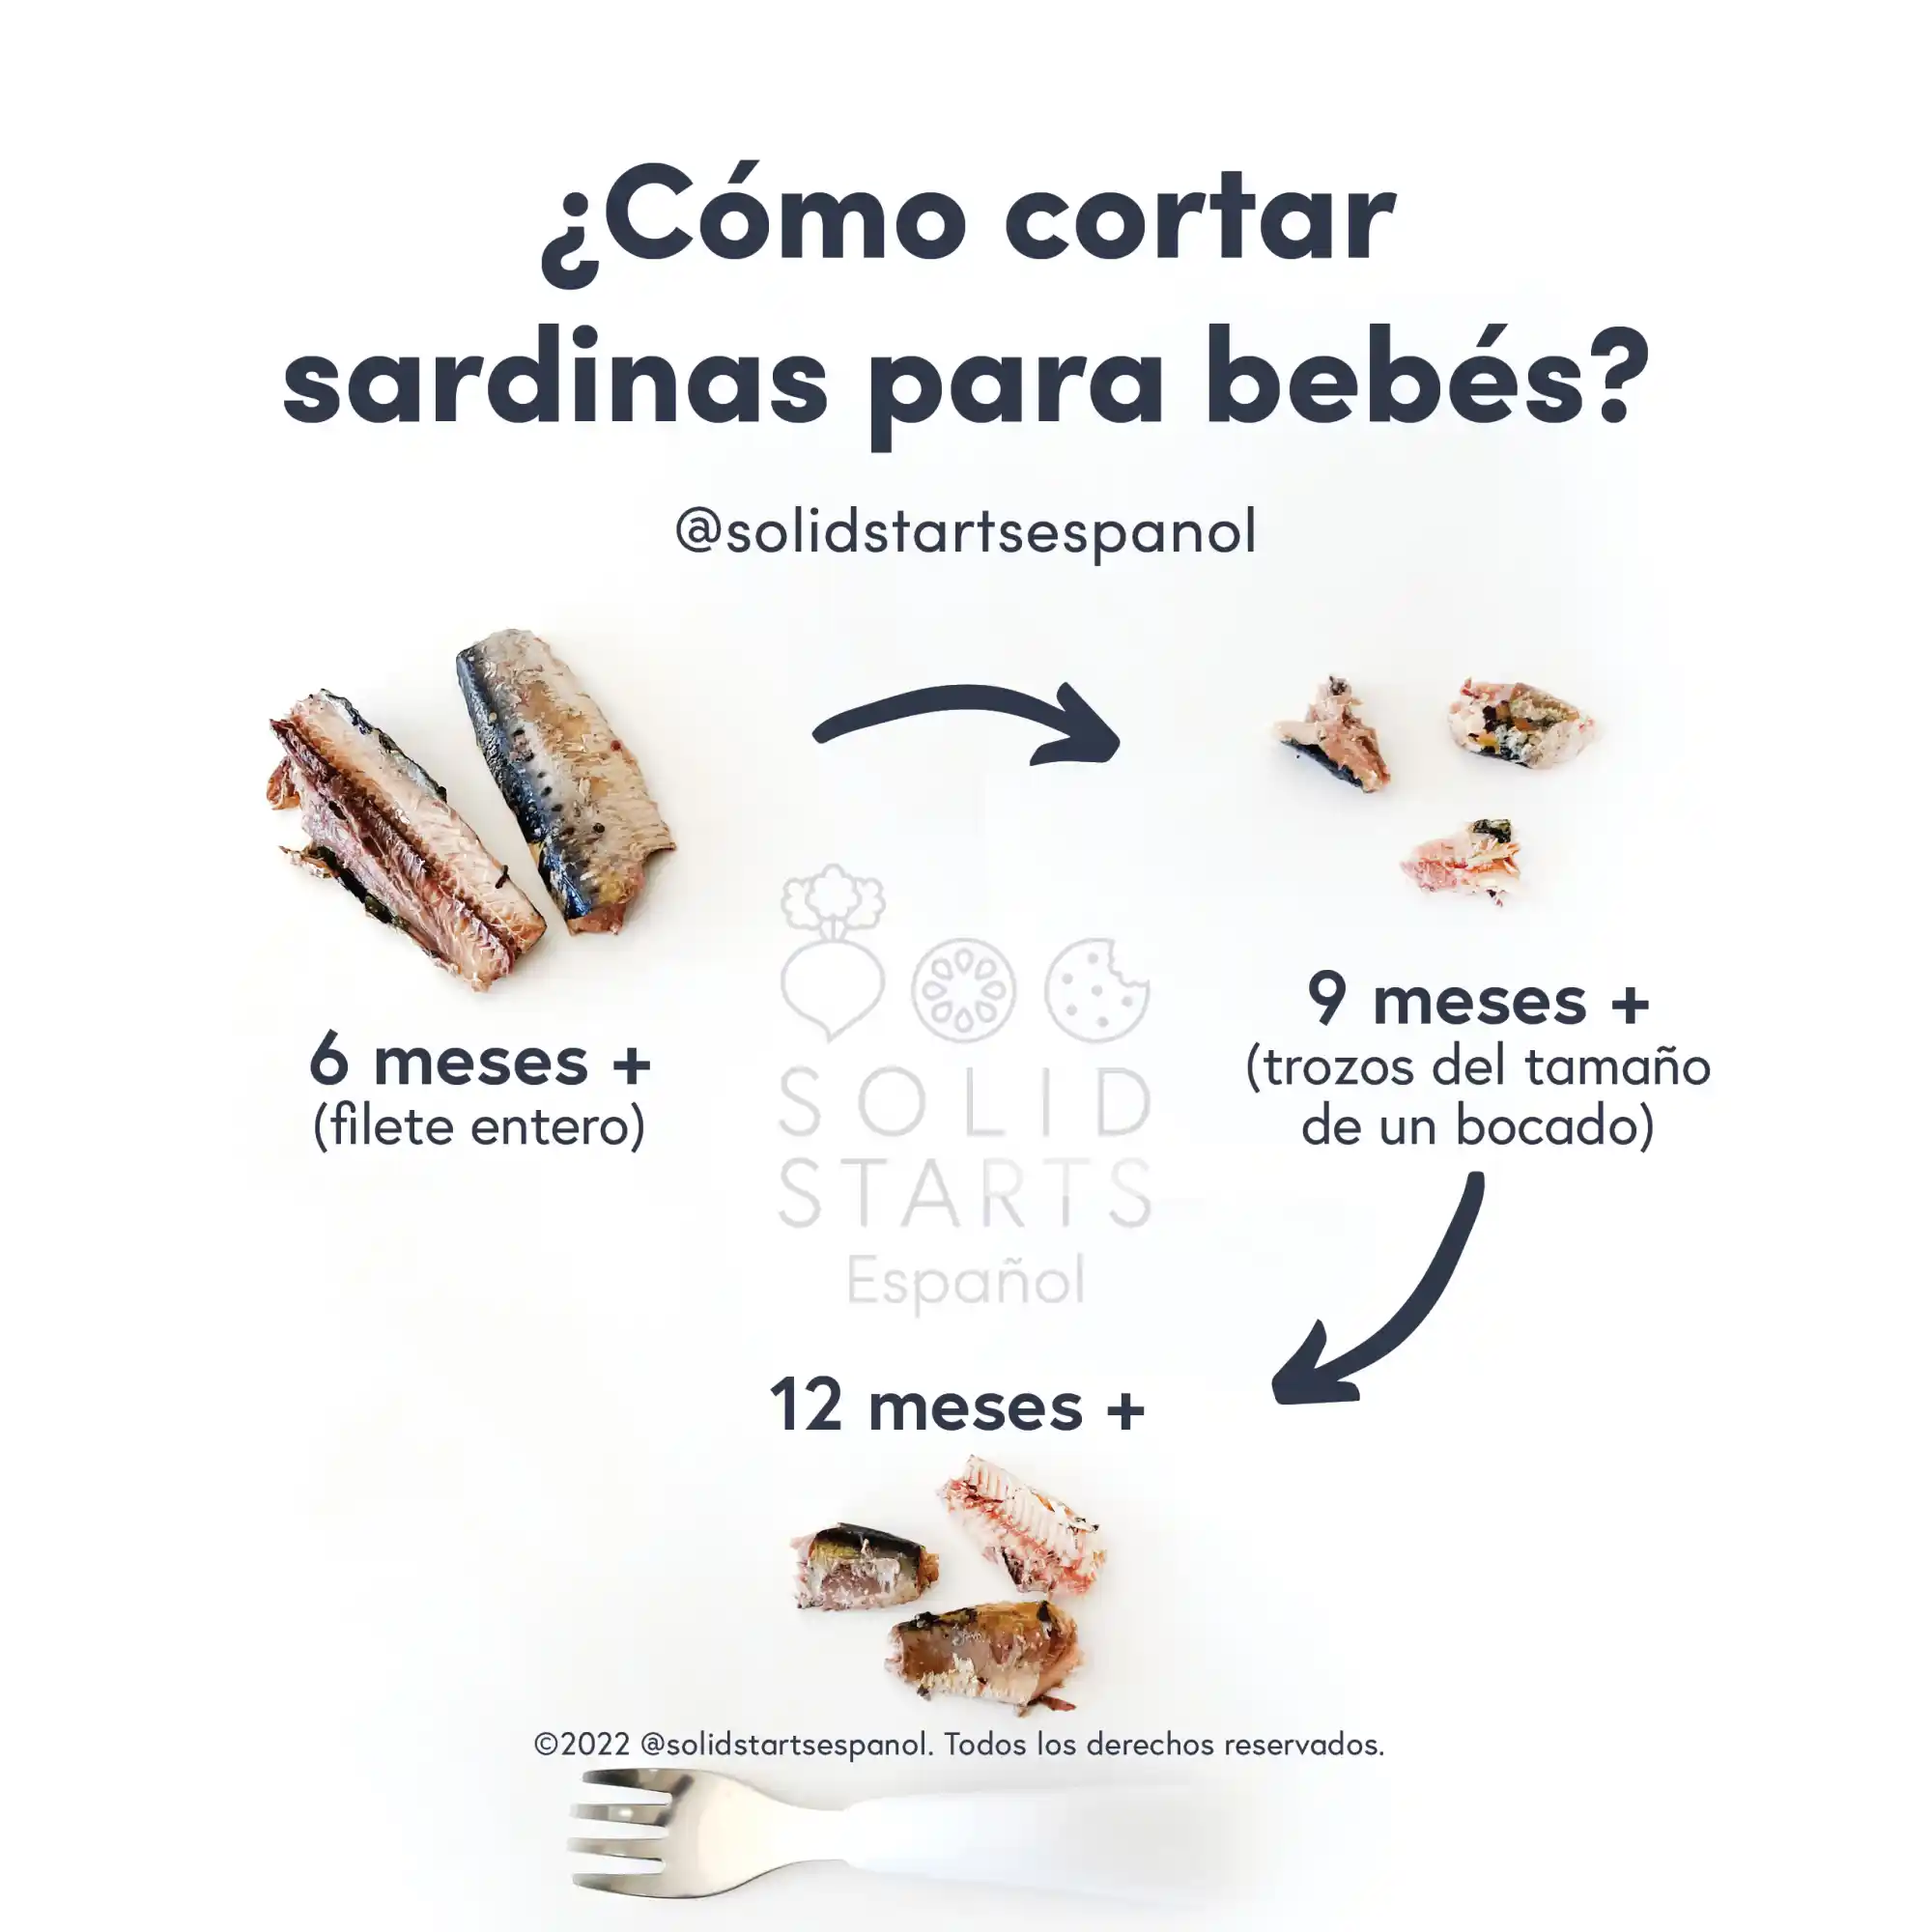 an infographic with the header "how to cut sardines for babies": whole fillets for babies 6 mos+, bite-sized pieces for 9 mos +, bite-sized pieces with a fork for 12 months+